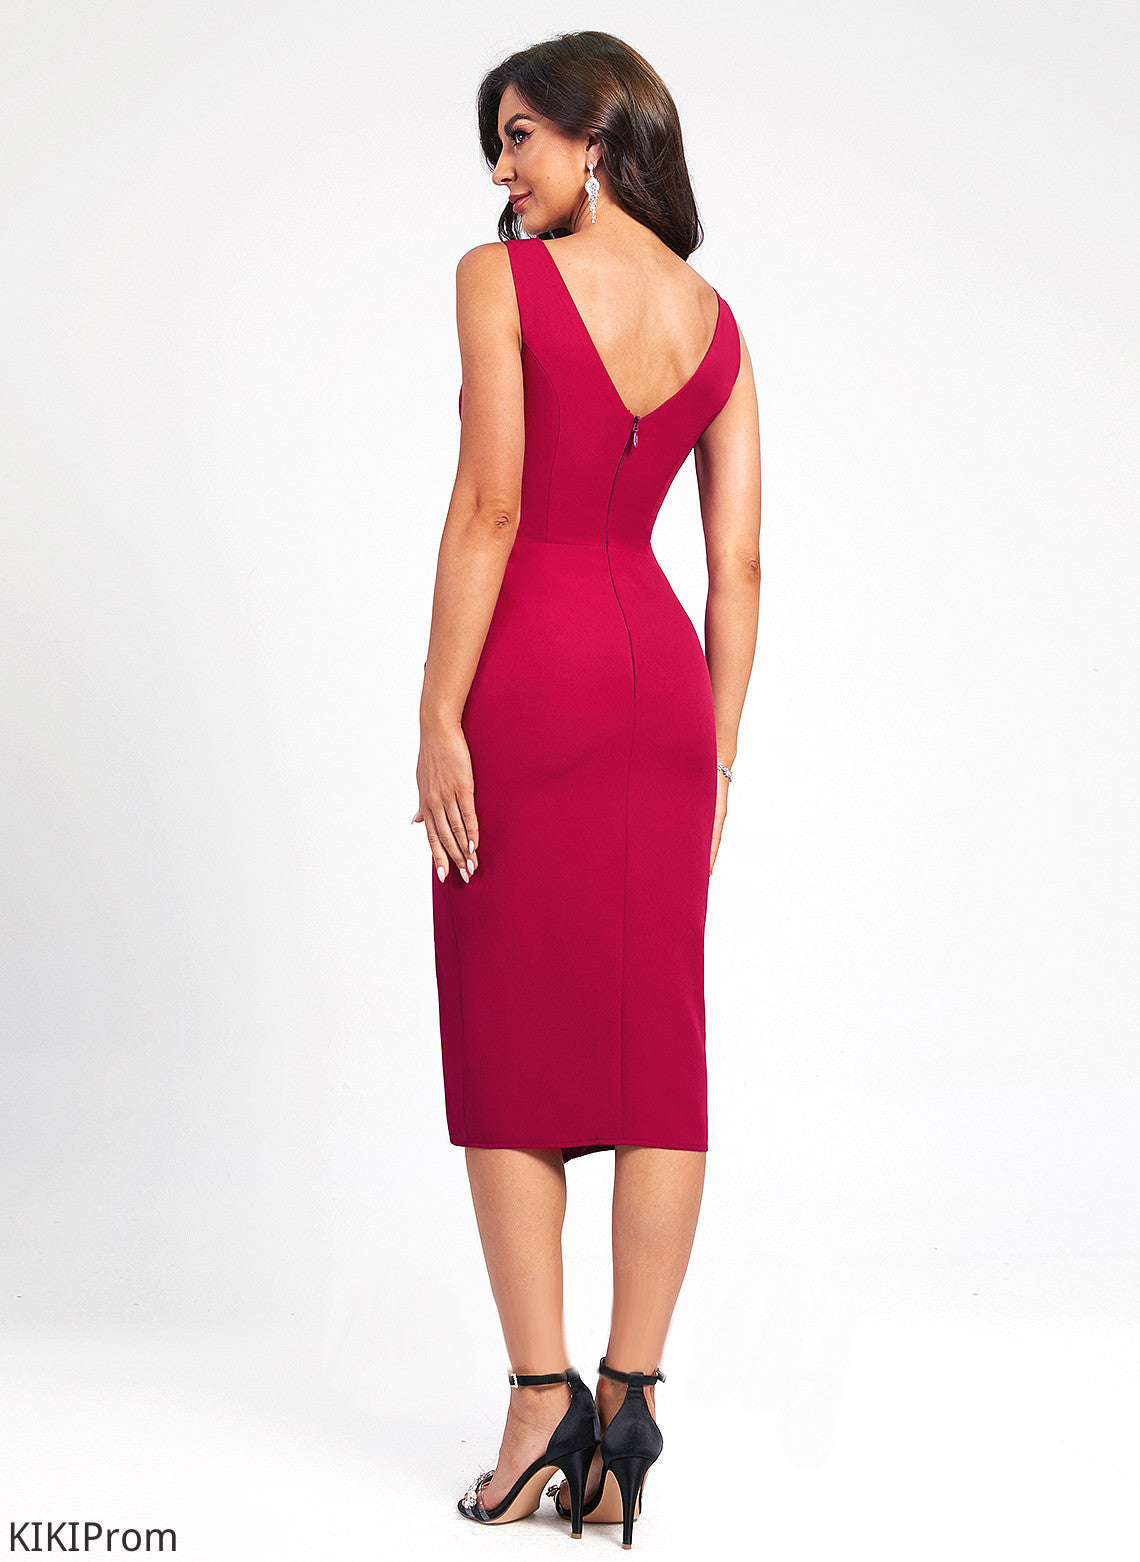 Stretch Bodycon Dress Ruffle Front Crepe Split Club Dresses Cocktail With Knee-Length Ayanna V-neck